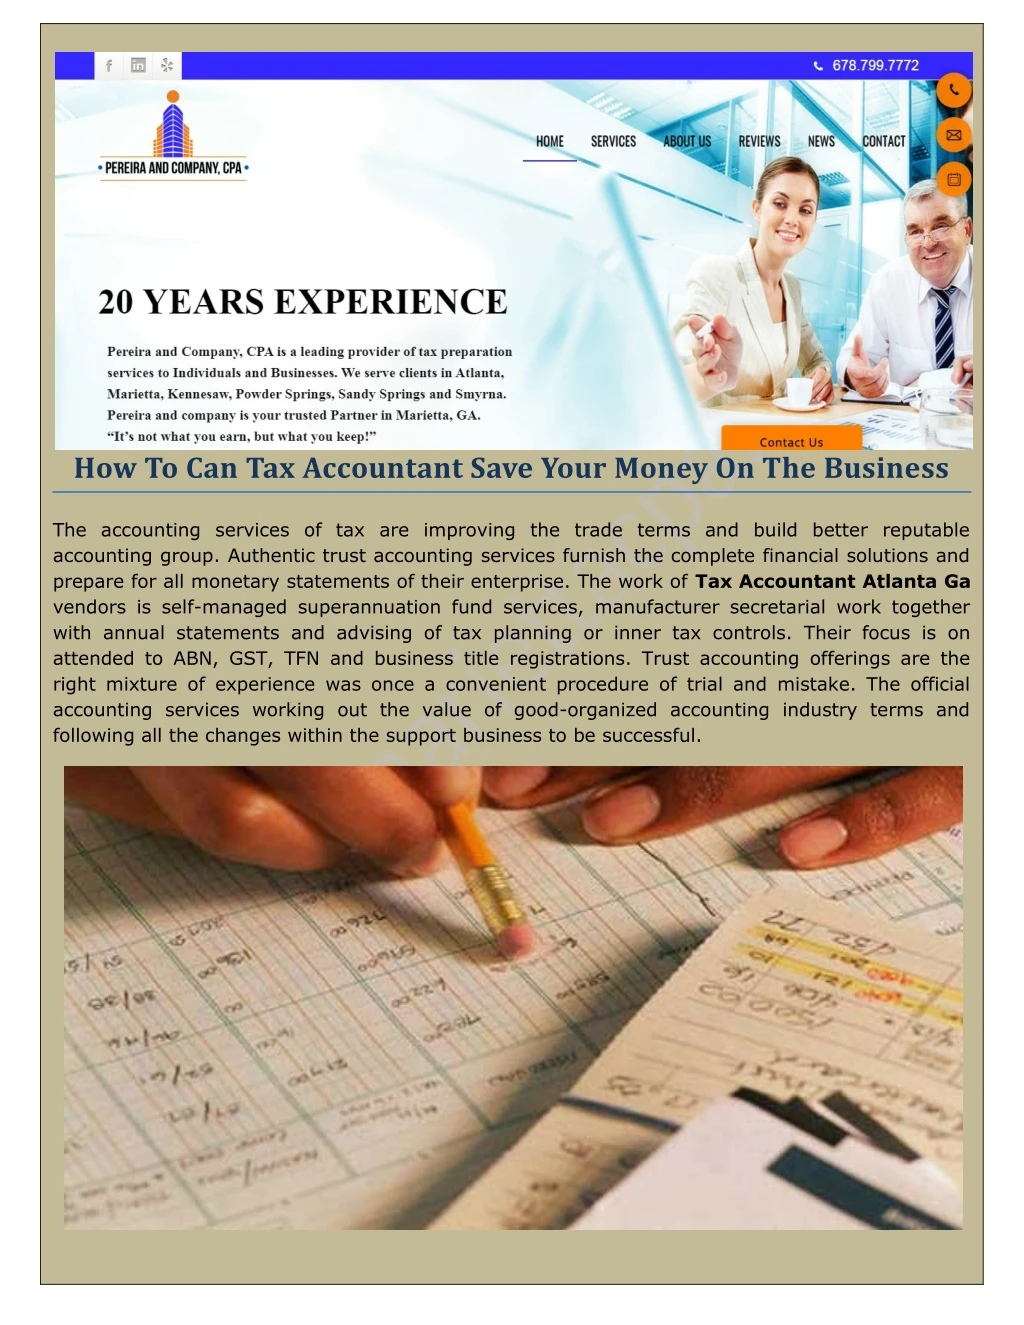 how to can tax accountant save your money